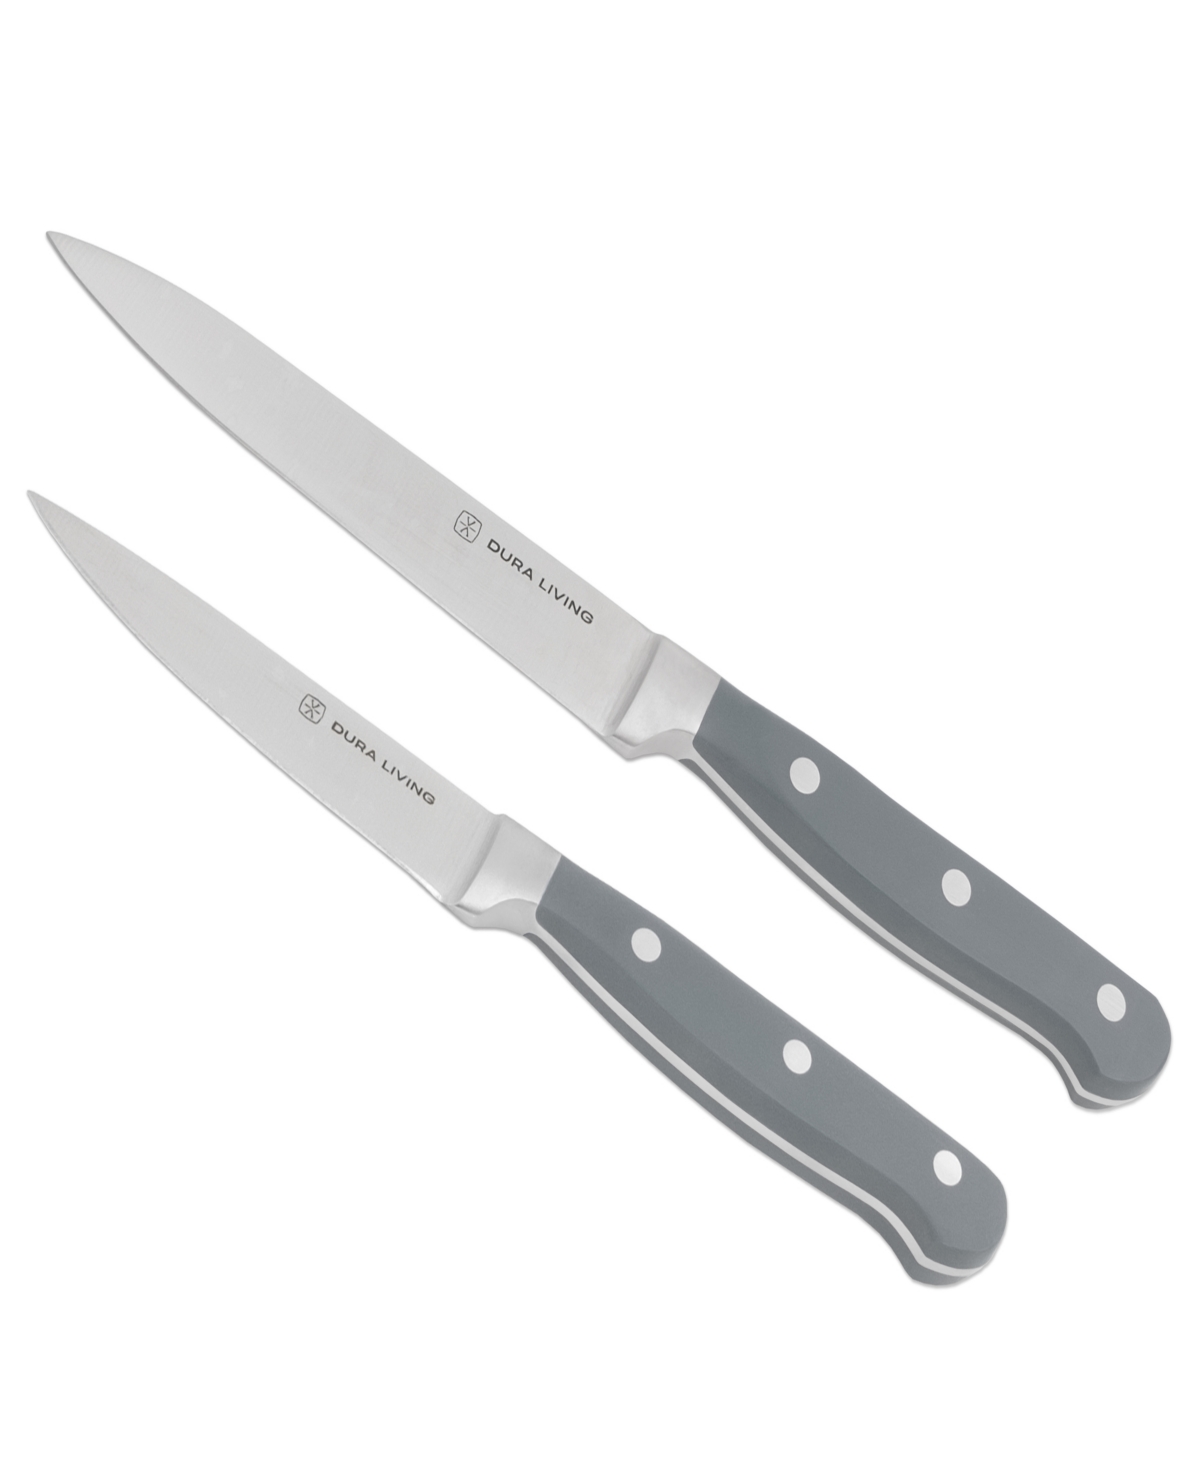 Duraliving 2-piece Knife Set In Gray